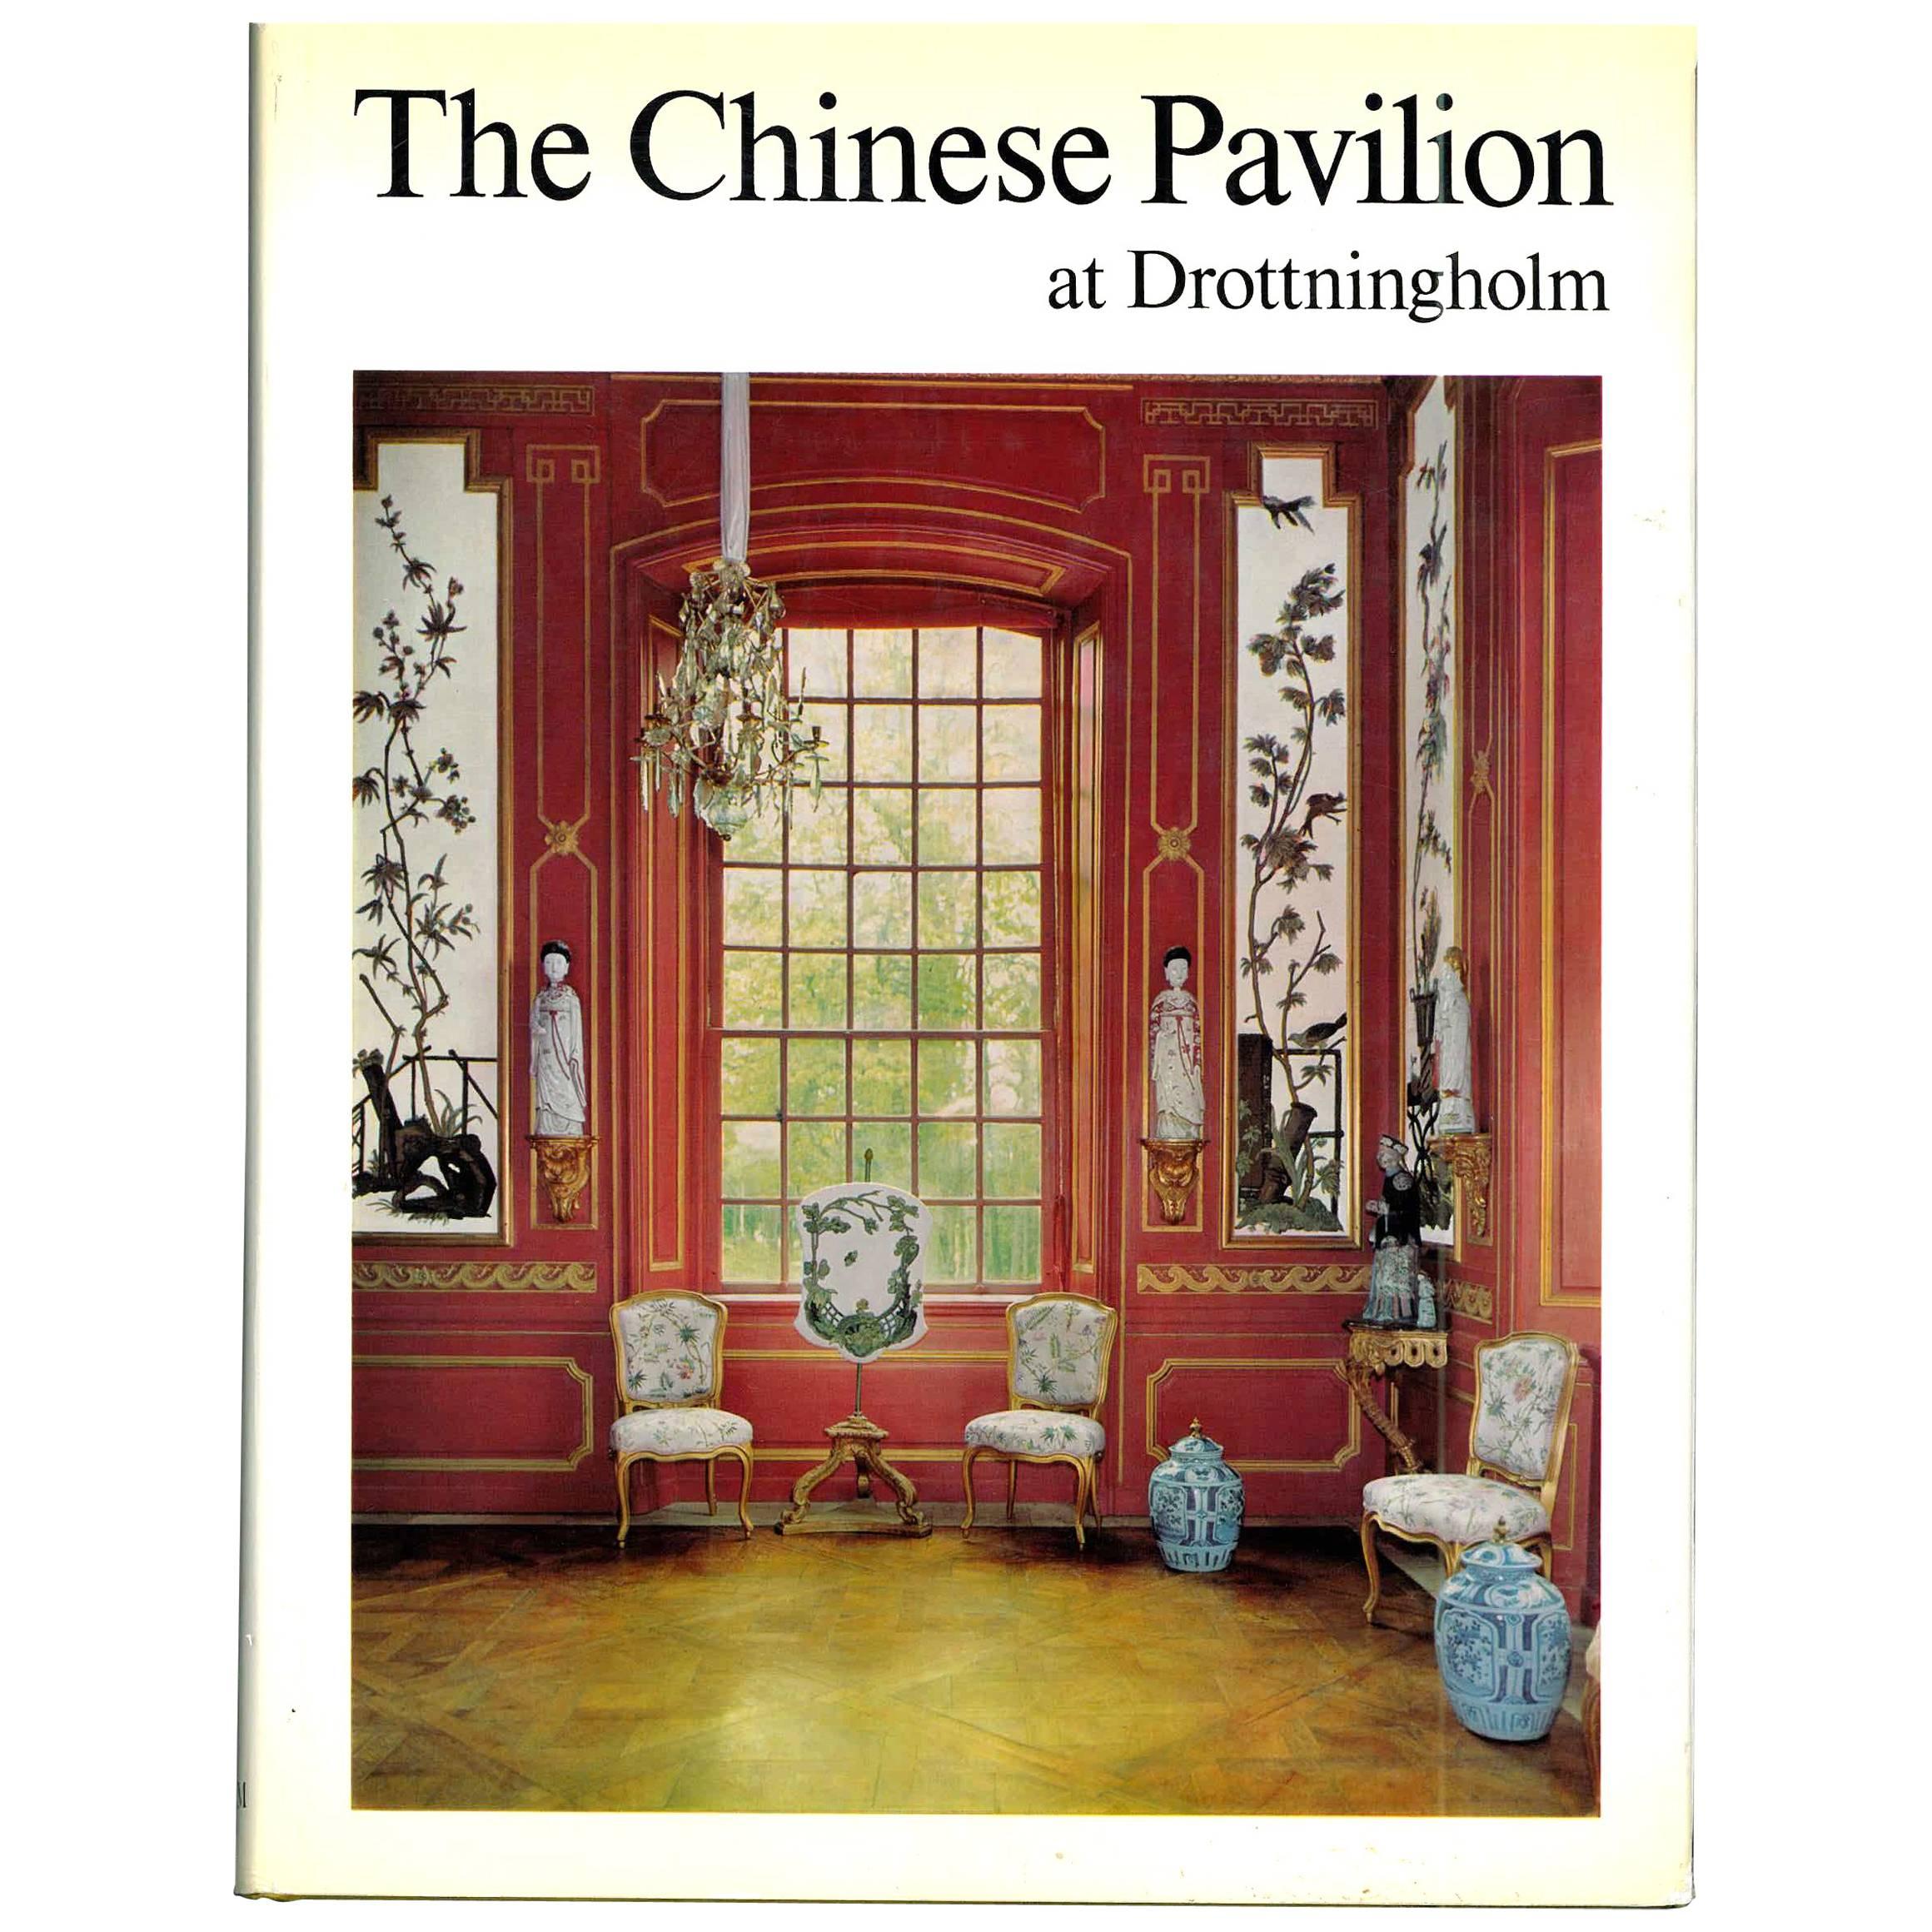 The Chinese Pavilion at Drottningholm (Book)